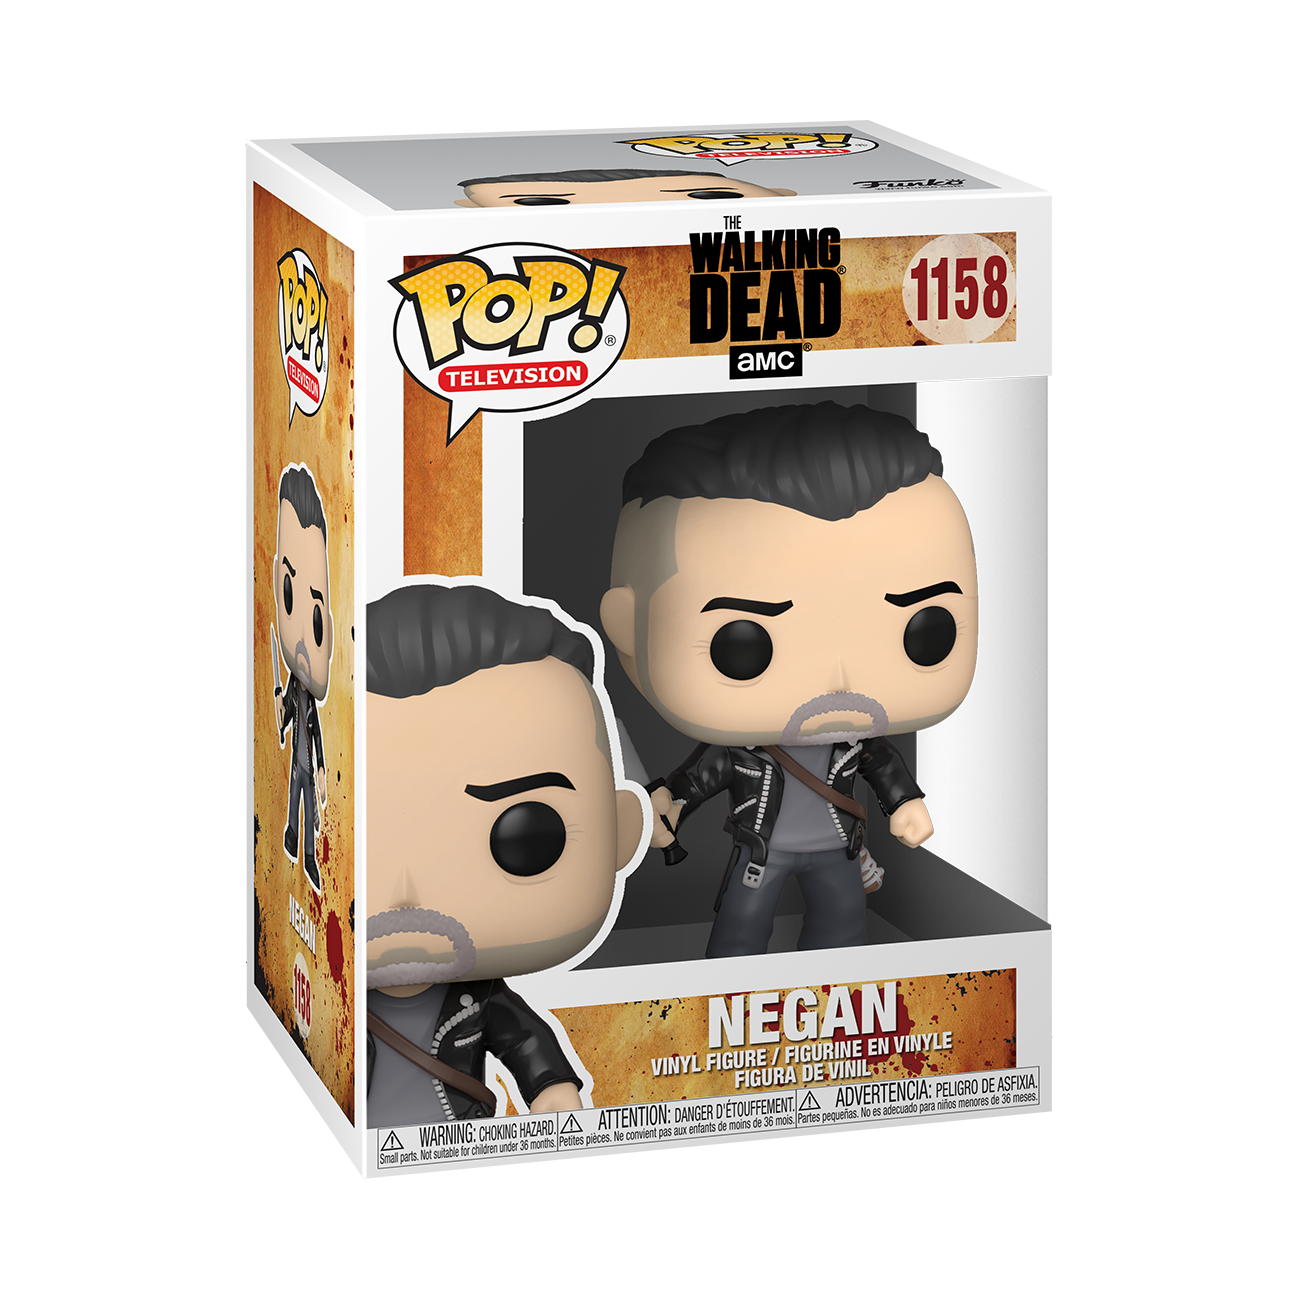  NEGAN SUPPLY DROP FUNKO POP WALKING DEAD TWD JEFFREY DEAN MORGAN #1158</p><BR>In Stock<BR>In Stock Safety Information<br>Warning: Not suitable for children under 3 years. Small Parts. 